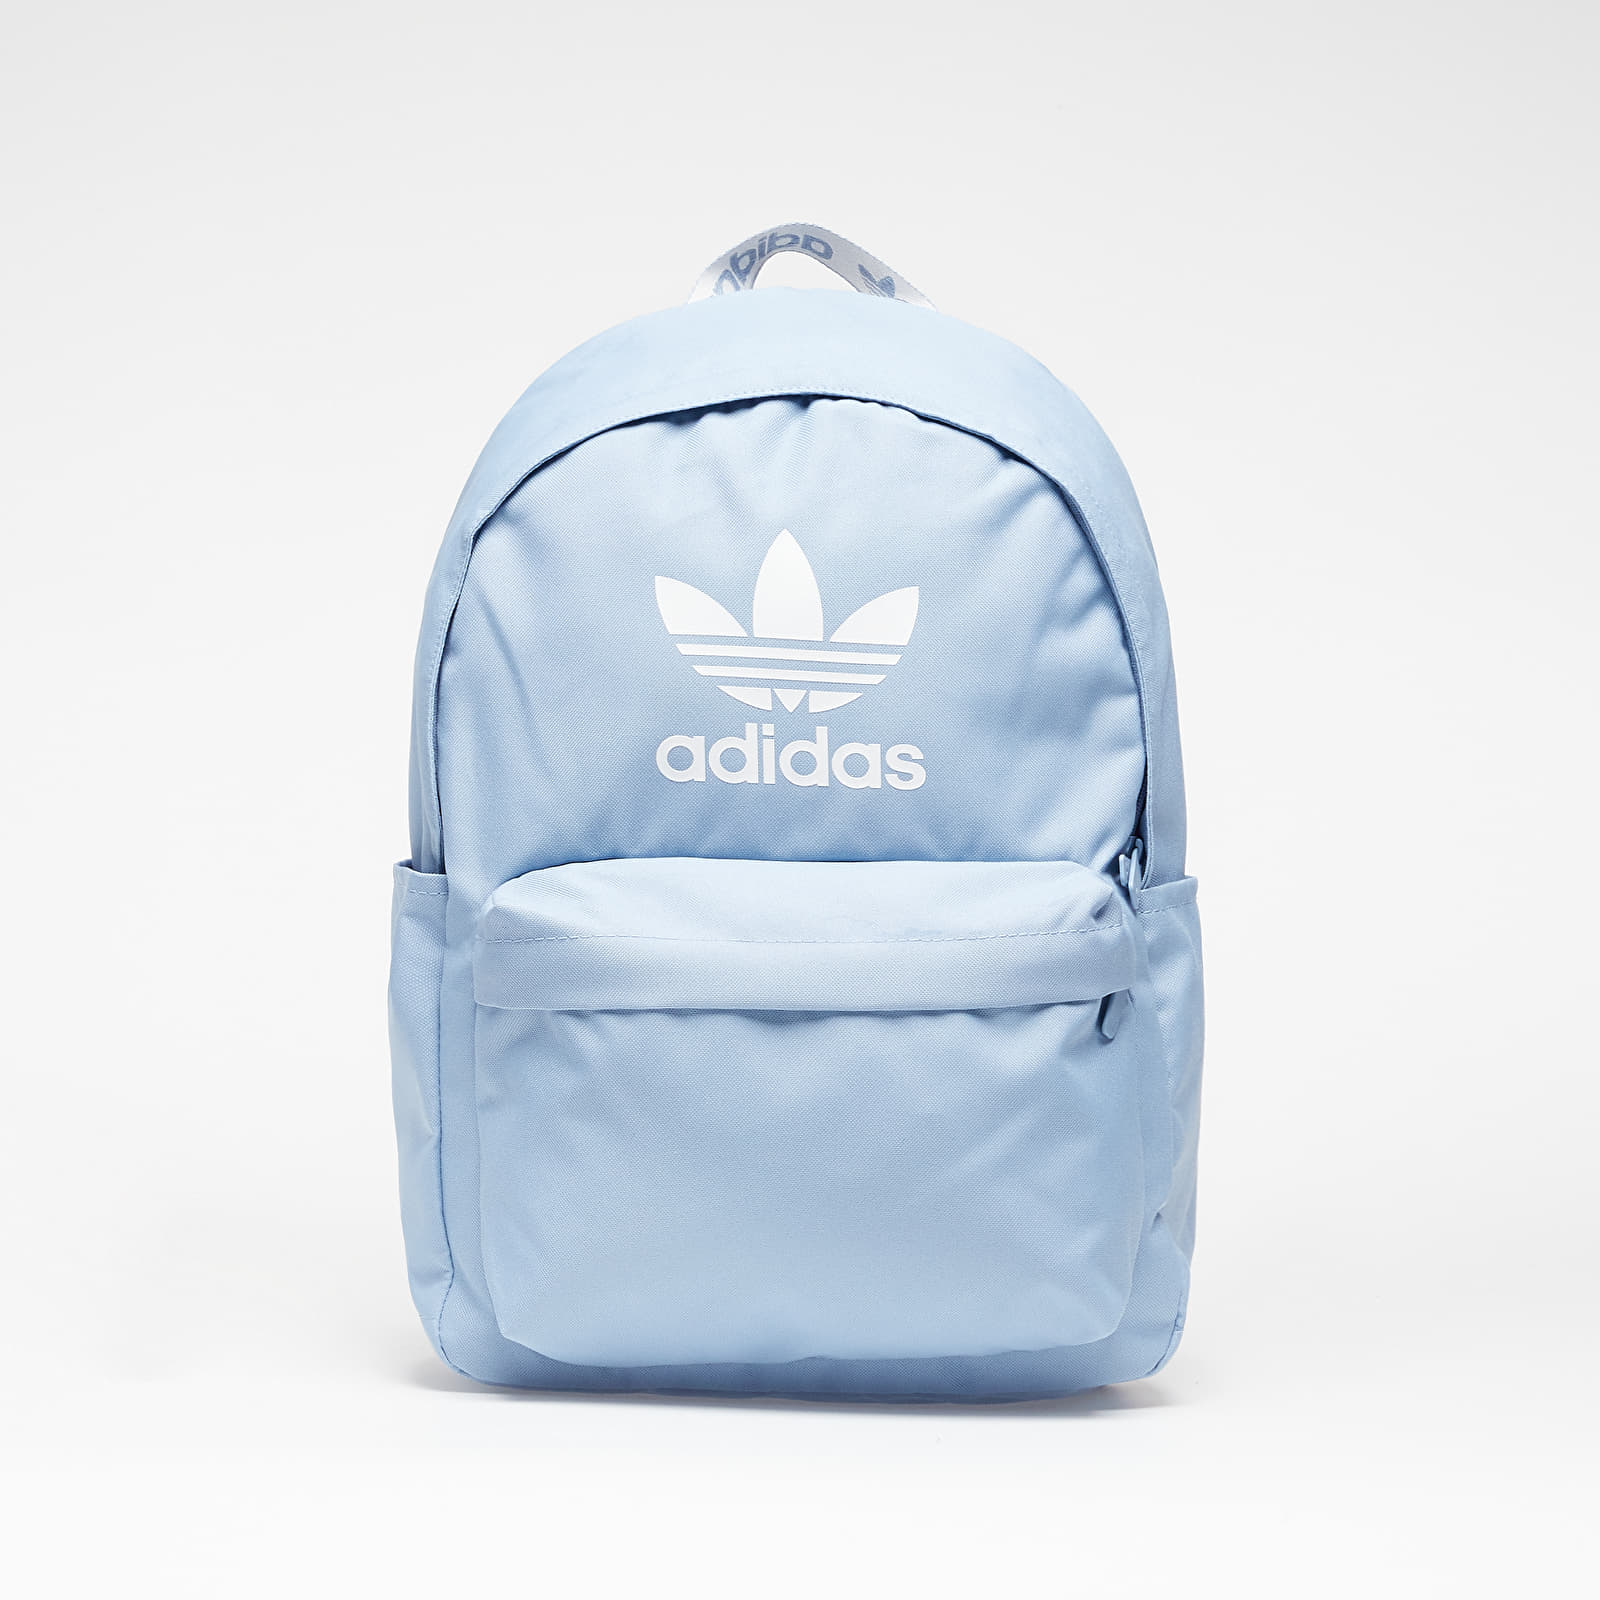 Раници adidas Adicolor Backpack Ambsky/ White 791575